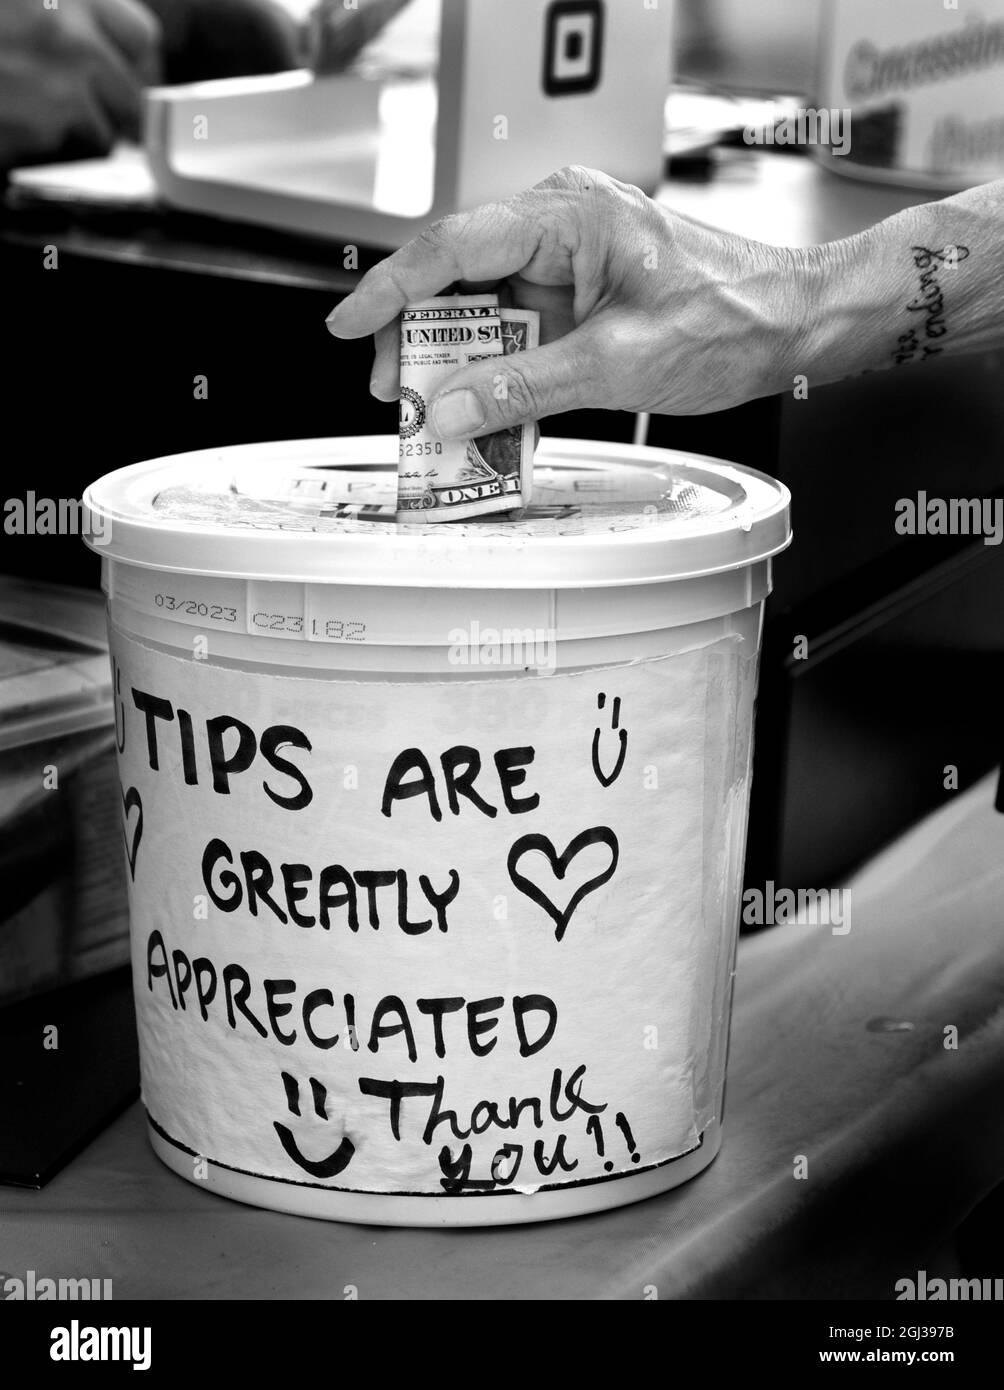 A customer places a dollar bill into a tip jar or tip bucket at an outdoor food vendor's booth in Santa Fe, New Mexico. Stock Photo